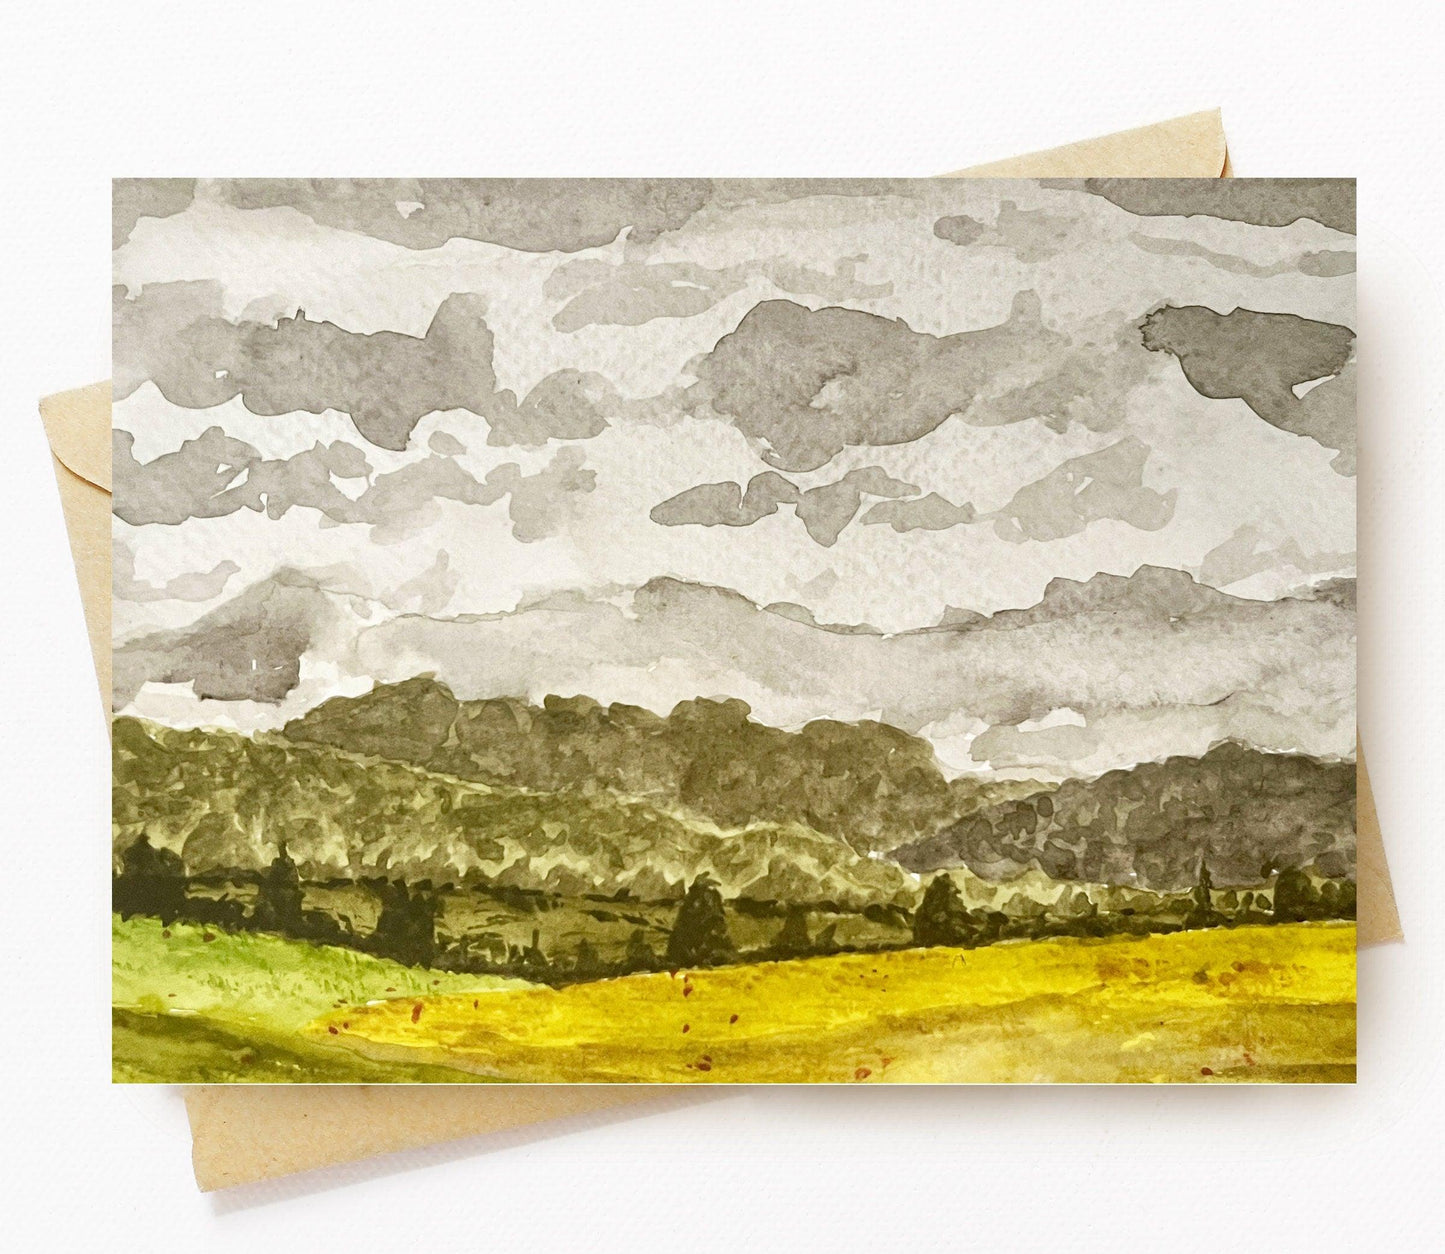 BellavanceInk: Greeting Card With Watercolor Of Farming Field In Crozet Virginia With The Blue Ridge Mountains  5 x 7 Inches - BellavanceInk